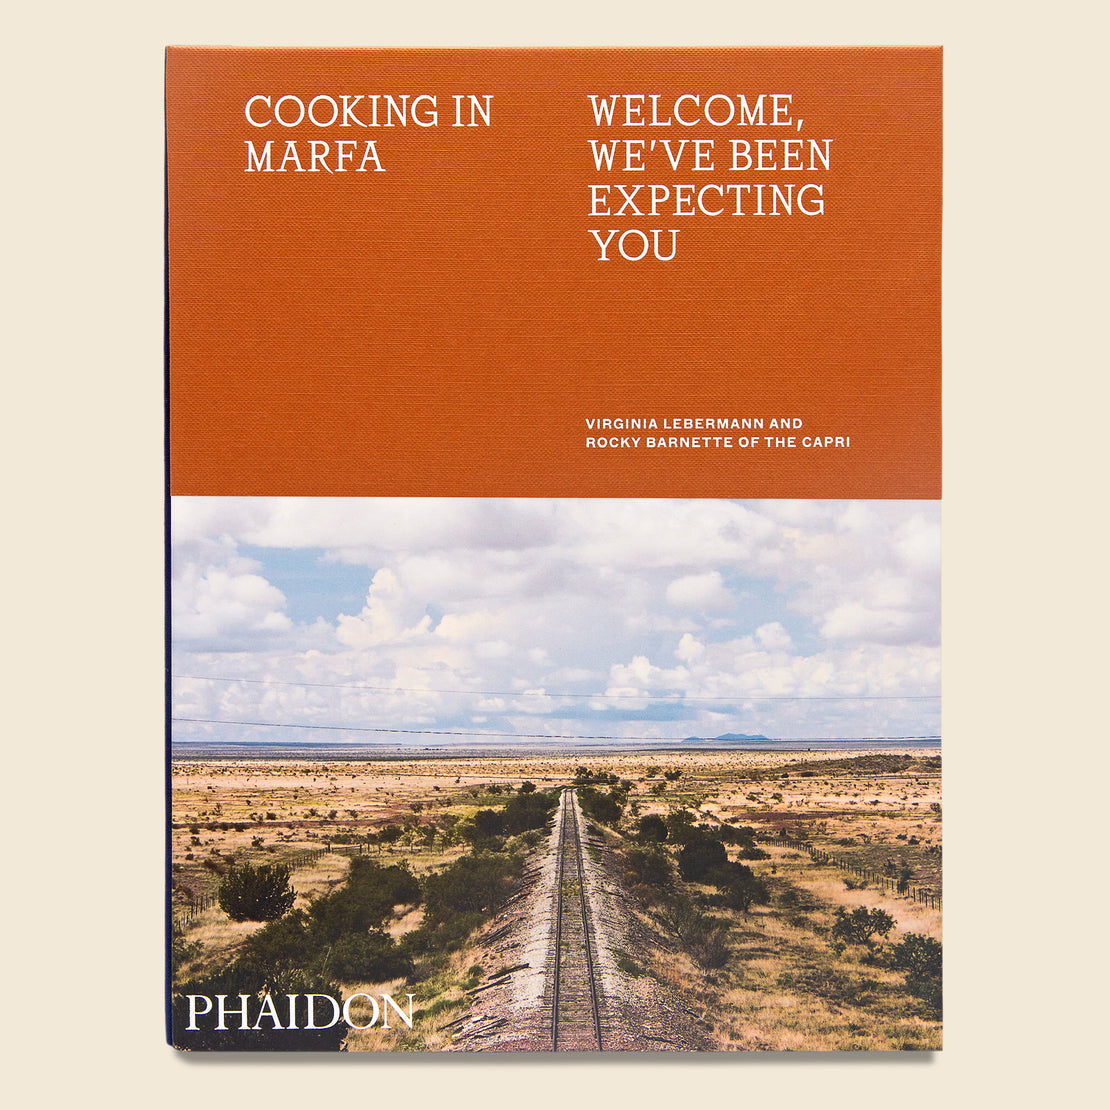 Bookstore Cooking in Marfa: Welcome, We've Been Expecting You